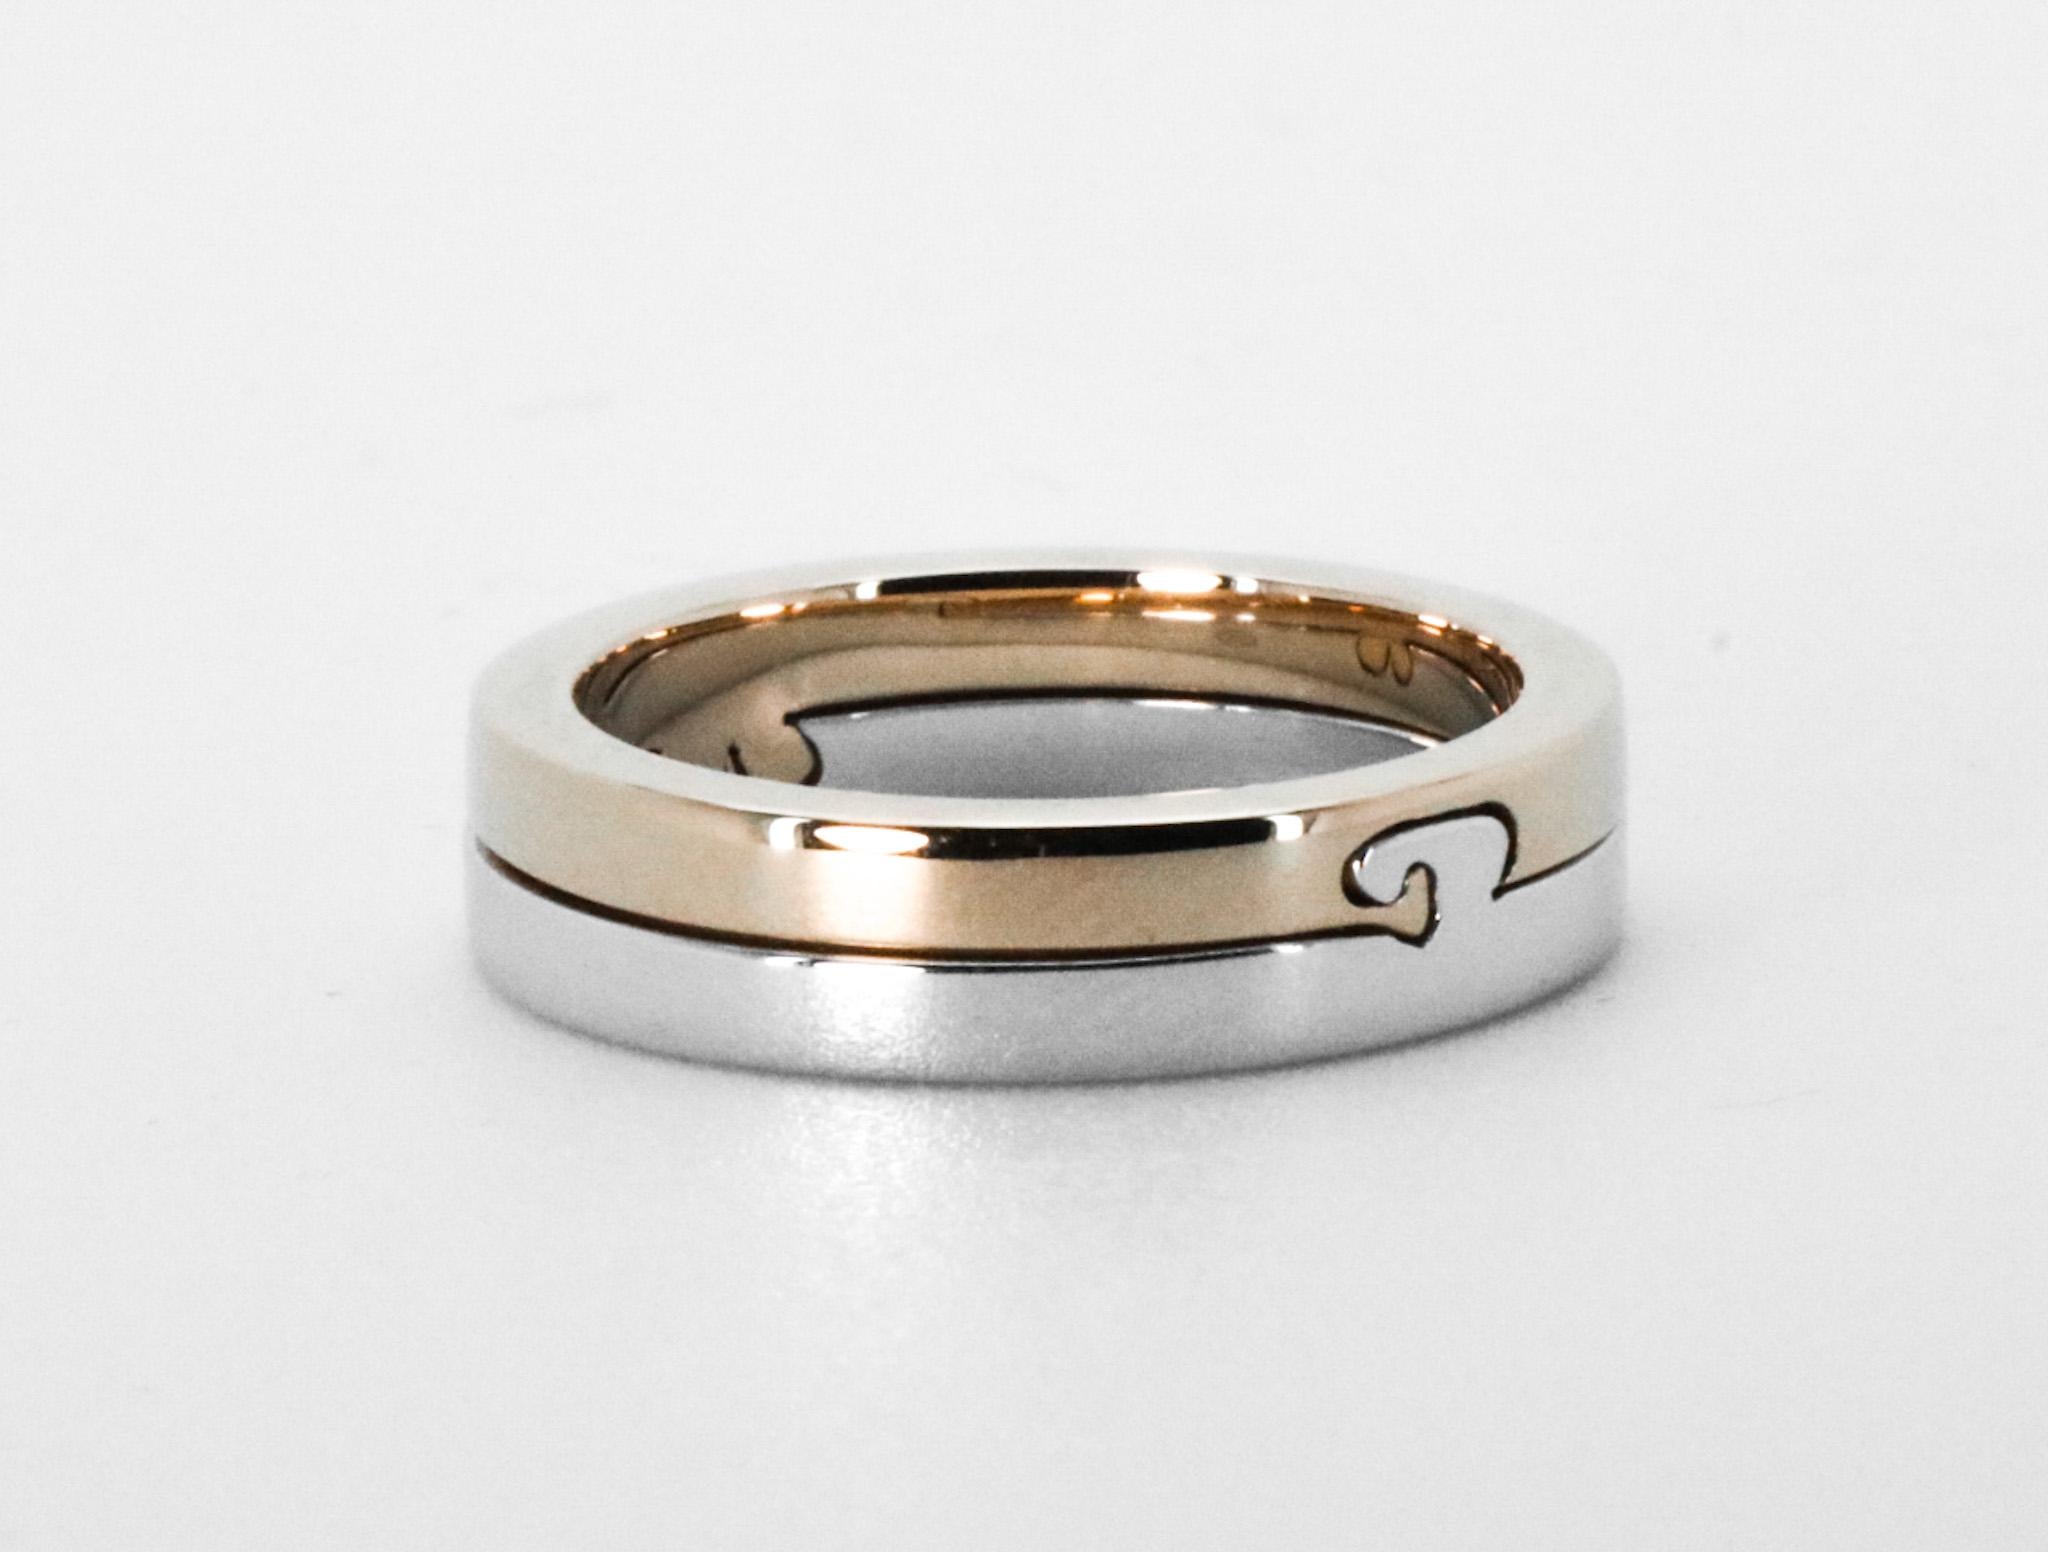 Bespoke 18k Gold Wedding Ring with Interlocking Initials Design In New Condition For Sale In Milan, IT